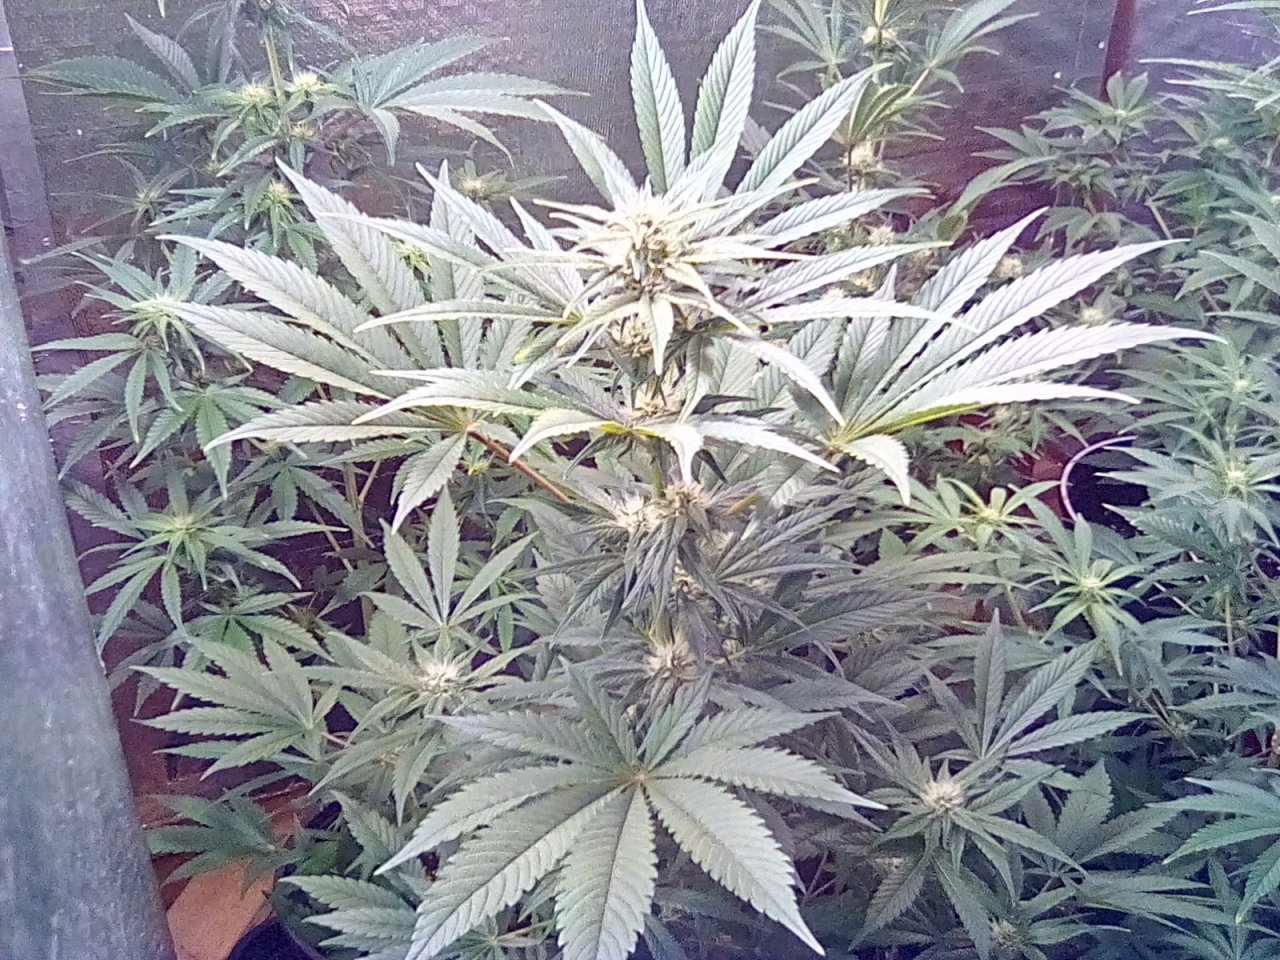 Fruity Pebbles day 30 of the flip